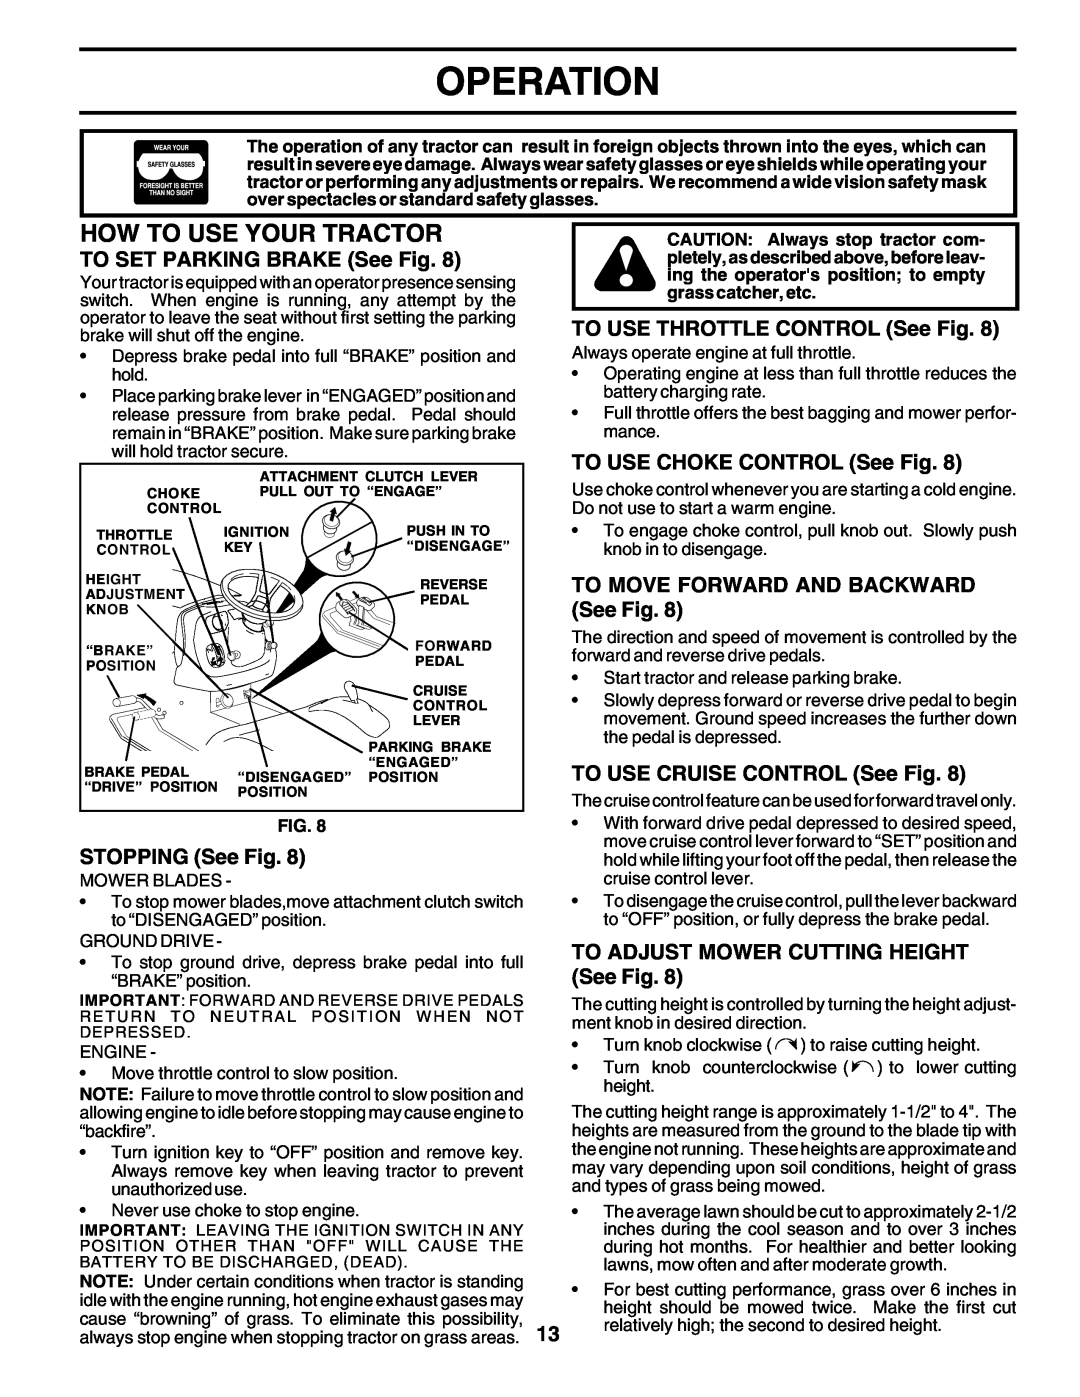 Poulan 180200 owner manual How To Use Your Tractor, Operation, TO SET PARKING BRAKE See Fig, STOPPING See Fig 